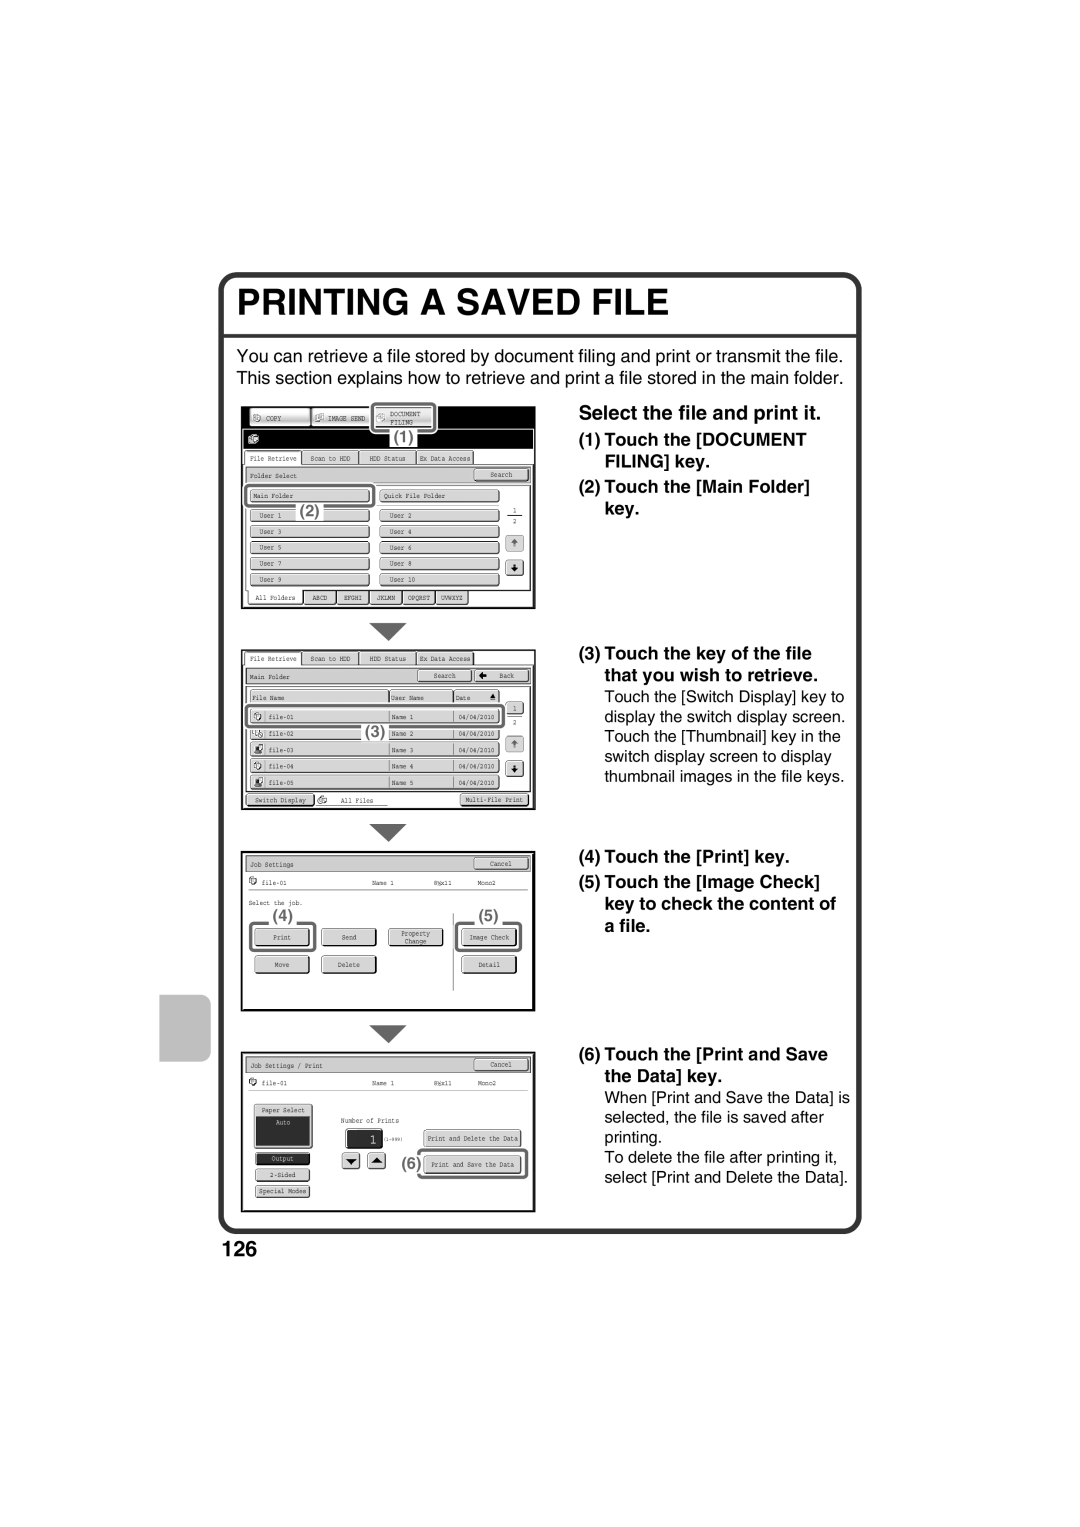 Sharp MX-B401 Printing A Saved File, Select the file and print it, Touch the key of the file that you wish to retrieve 